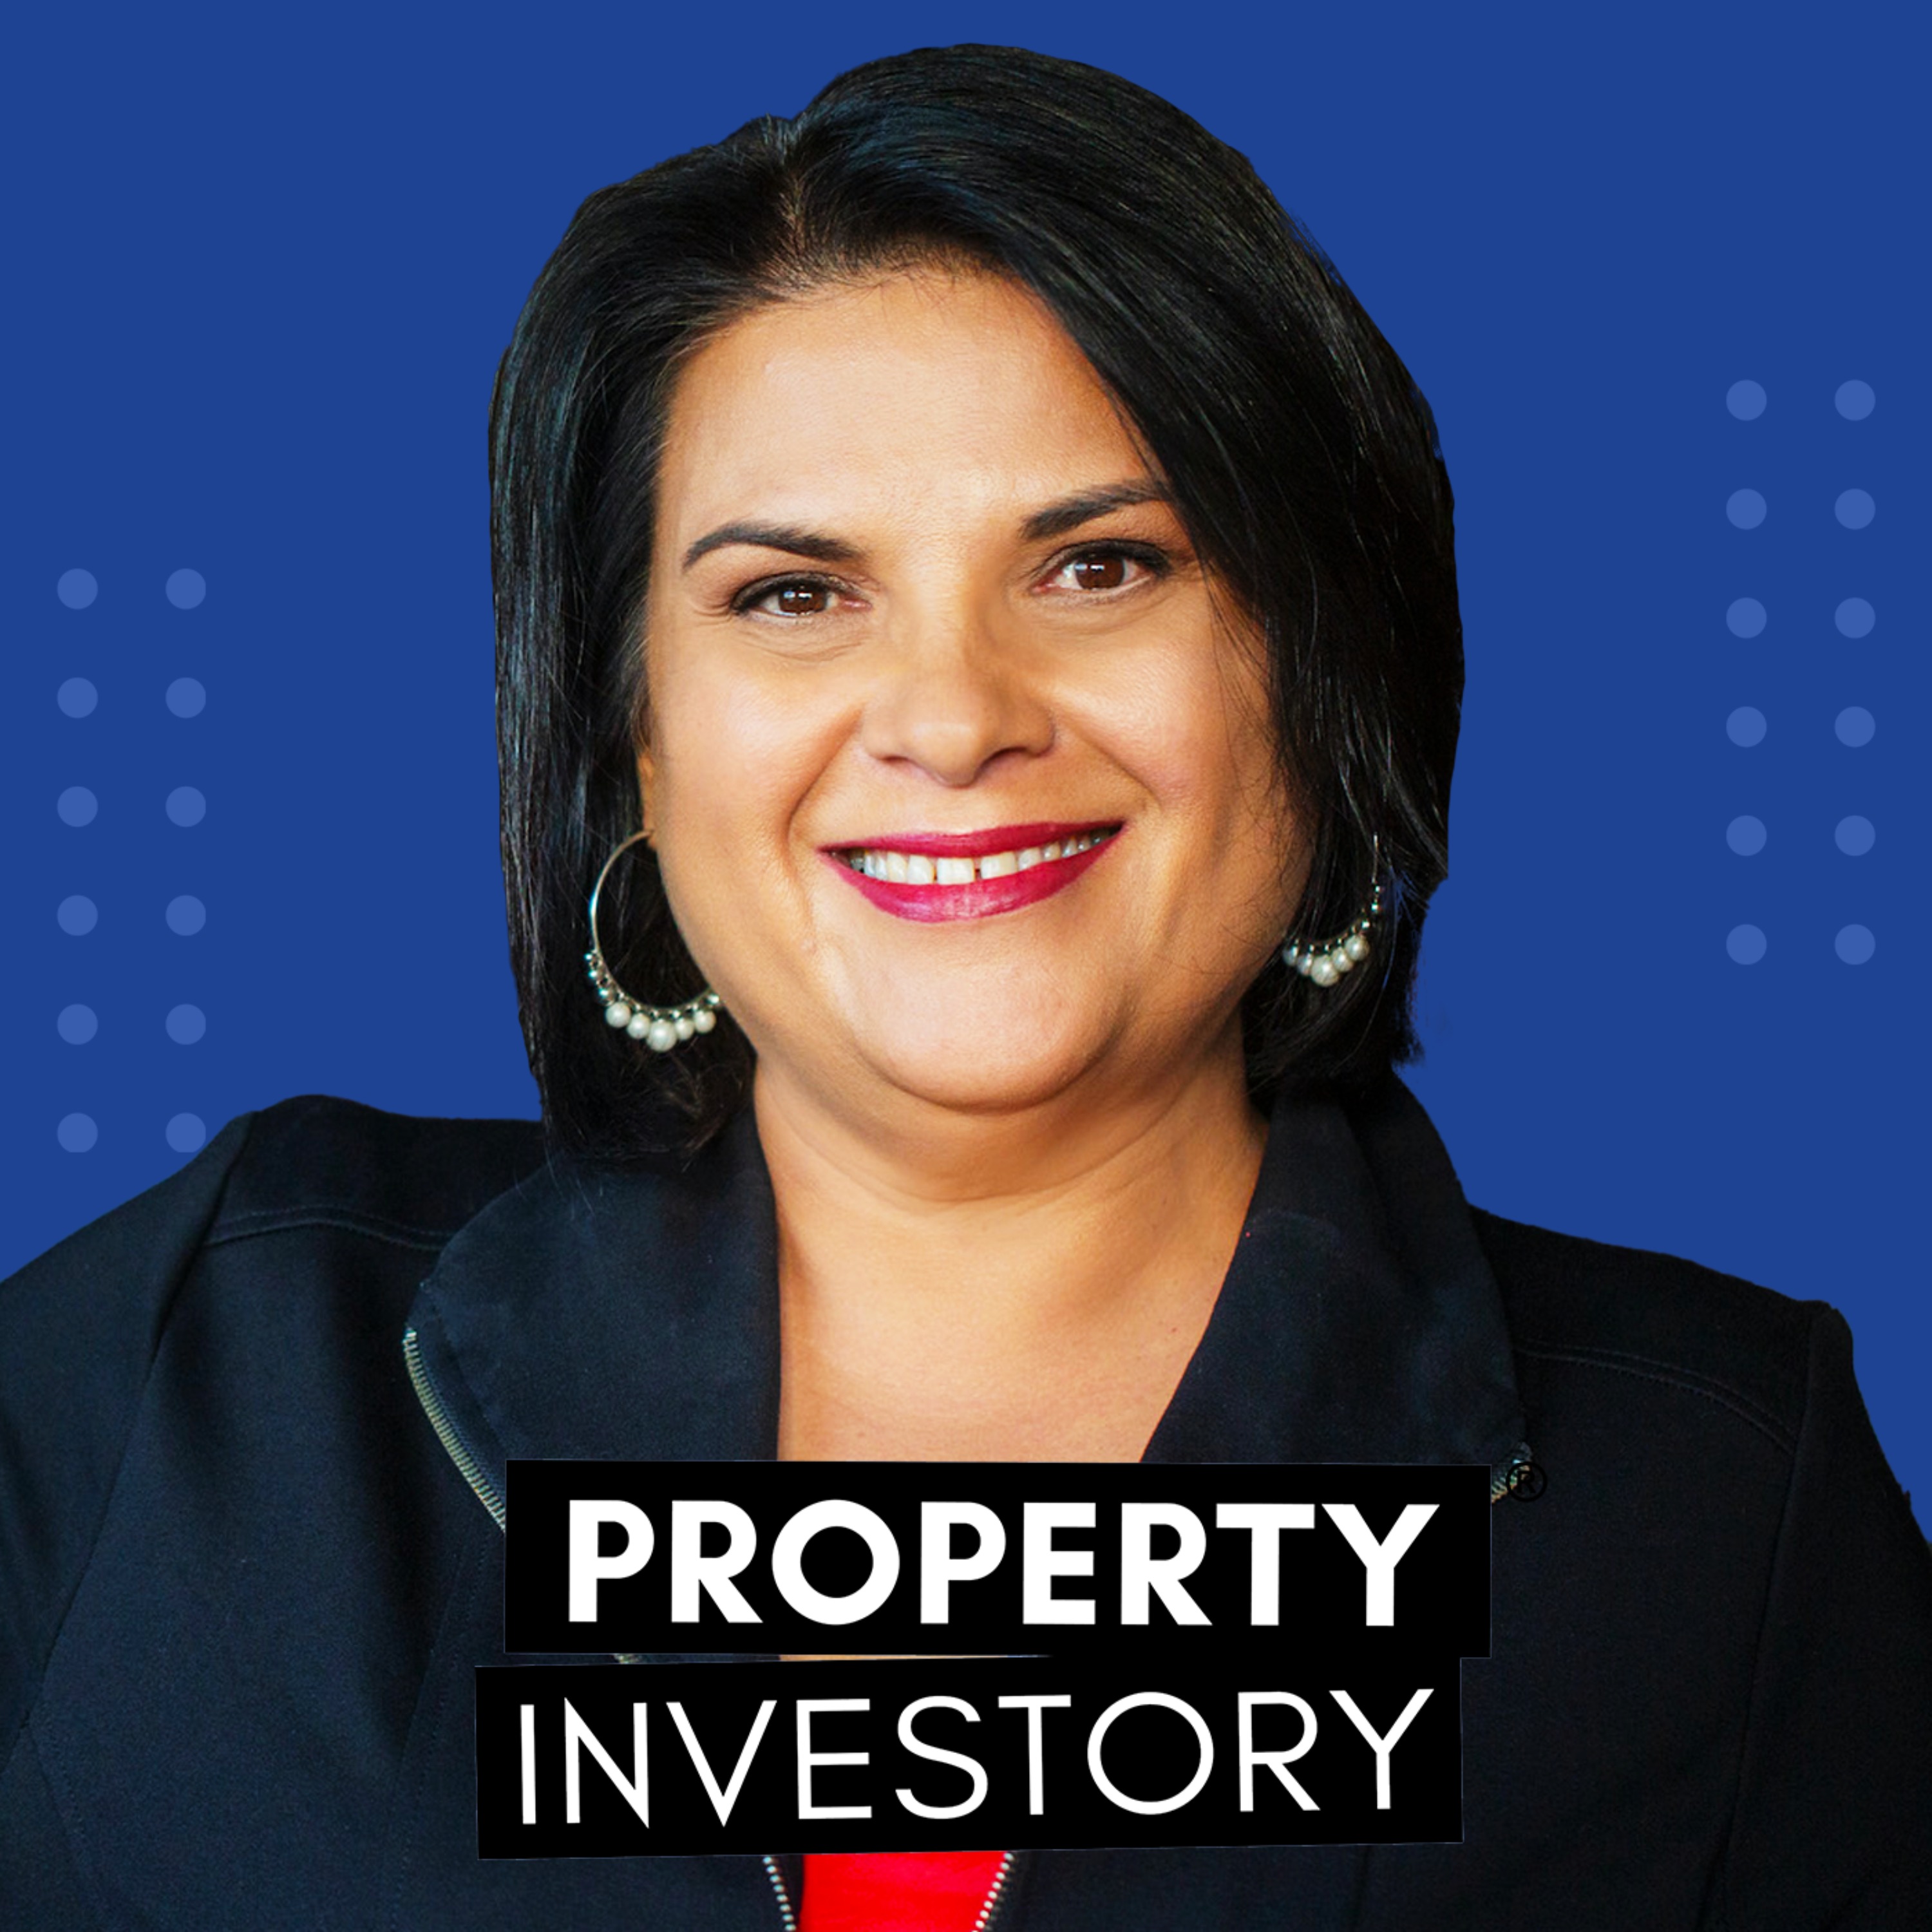 From Mingling with the Stars to Founding a Property Business with Ludwina Dautovic